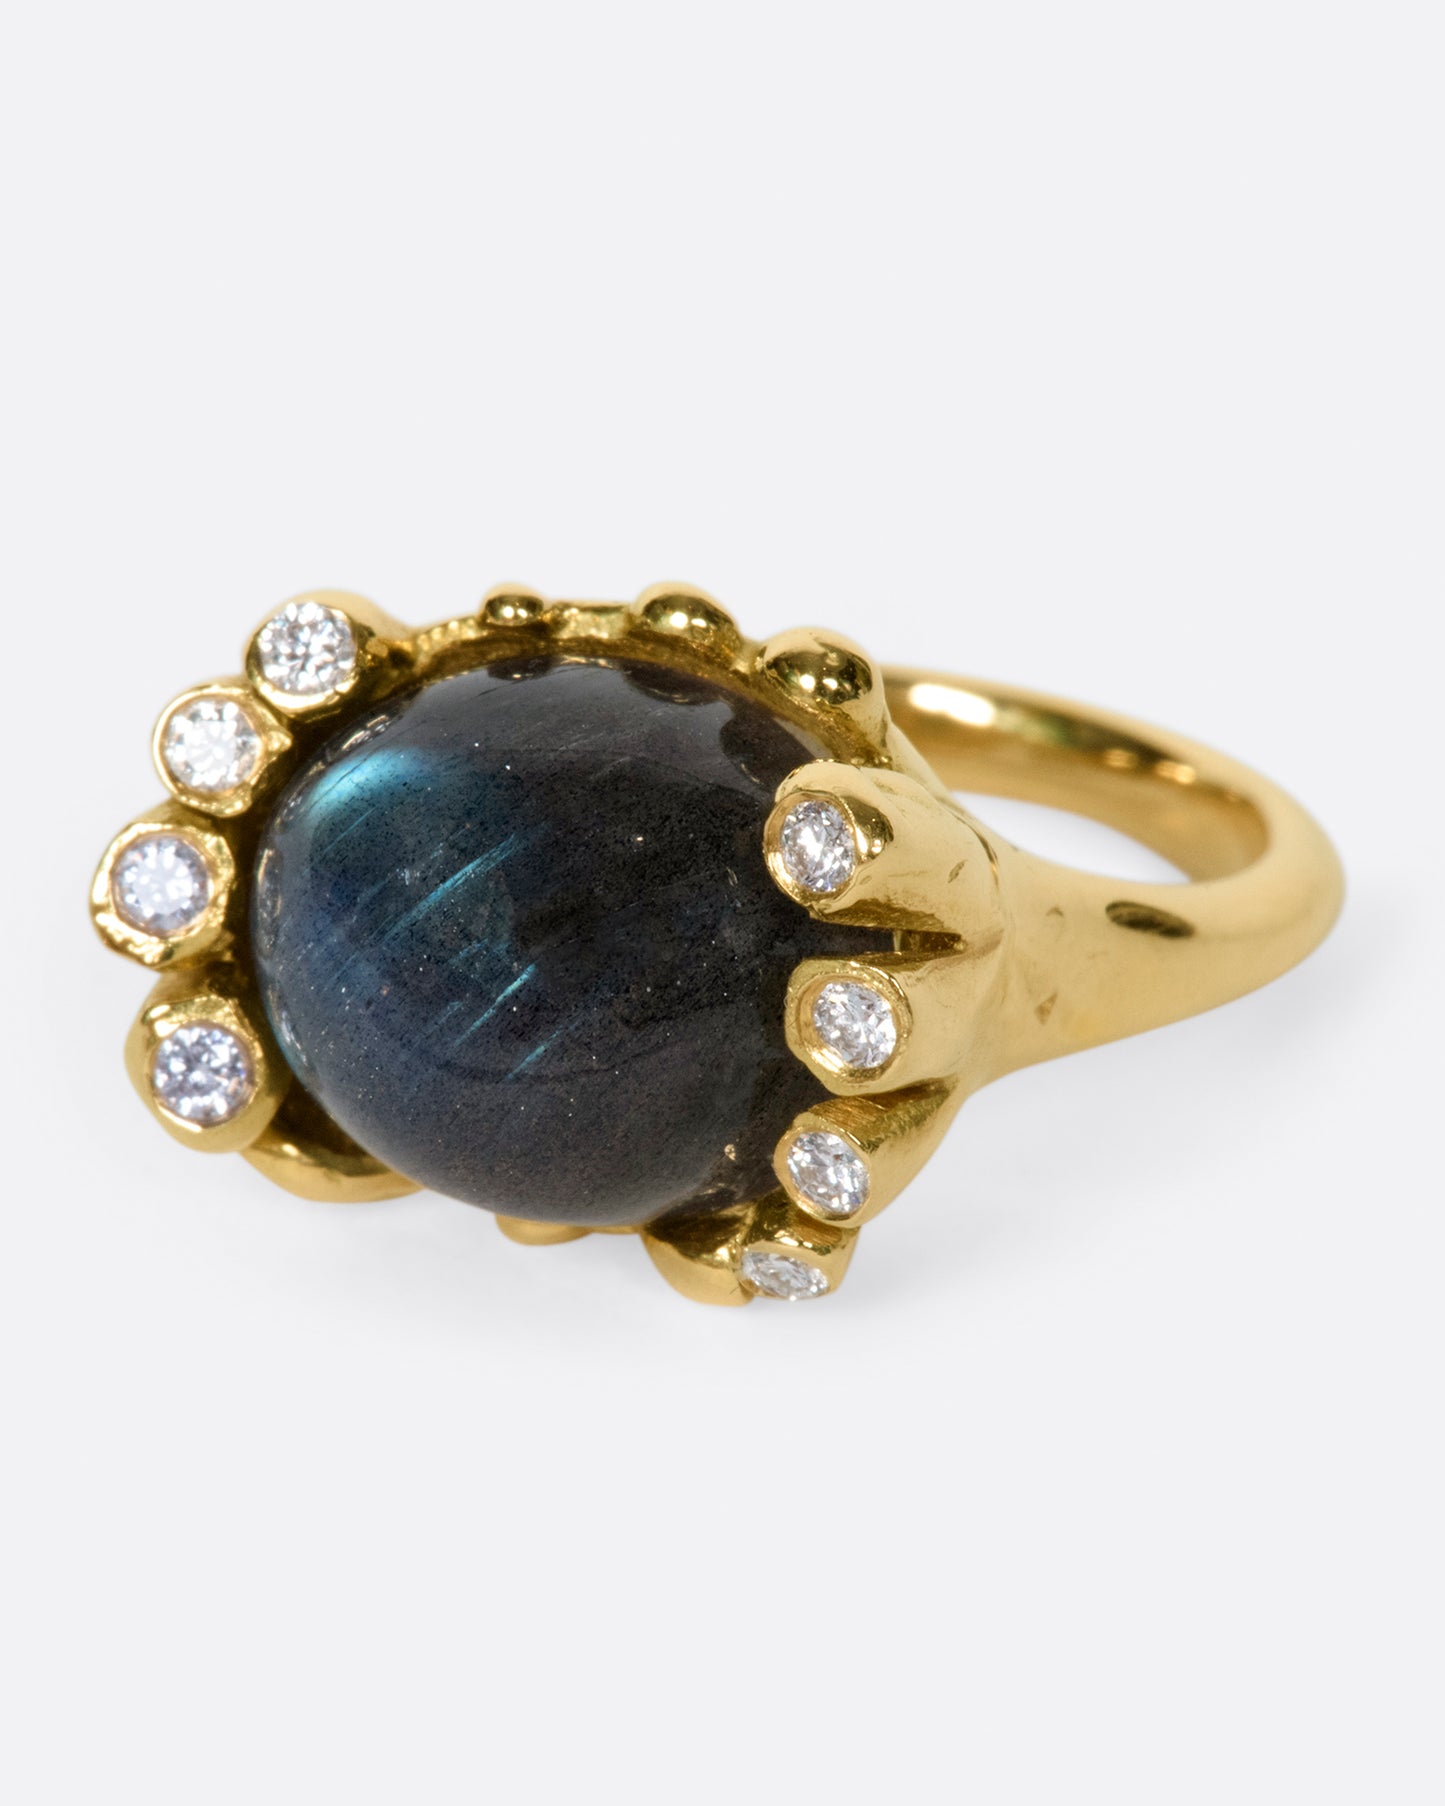 An iridescent labradorite cabochon is nestled amongst diamonds in its handcrafted setting.